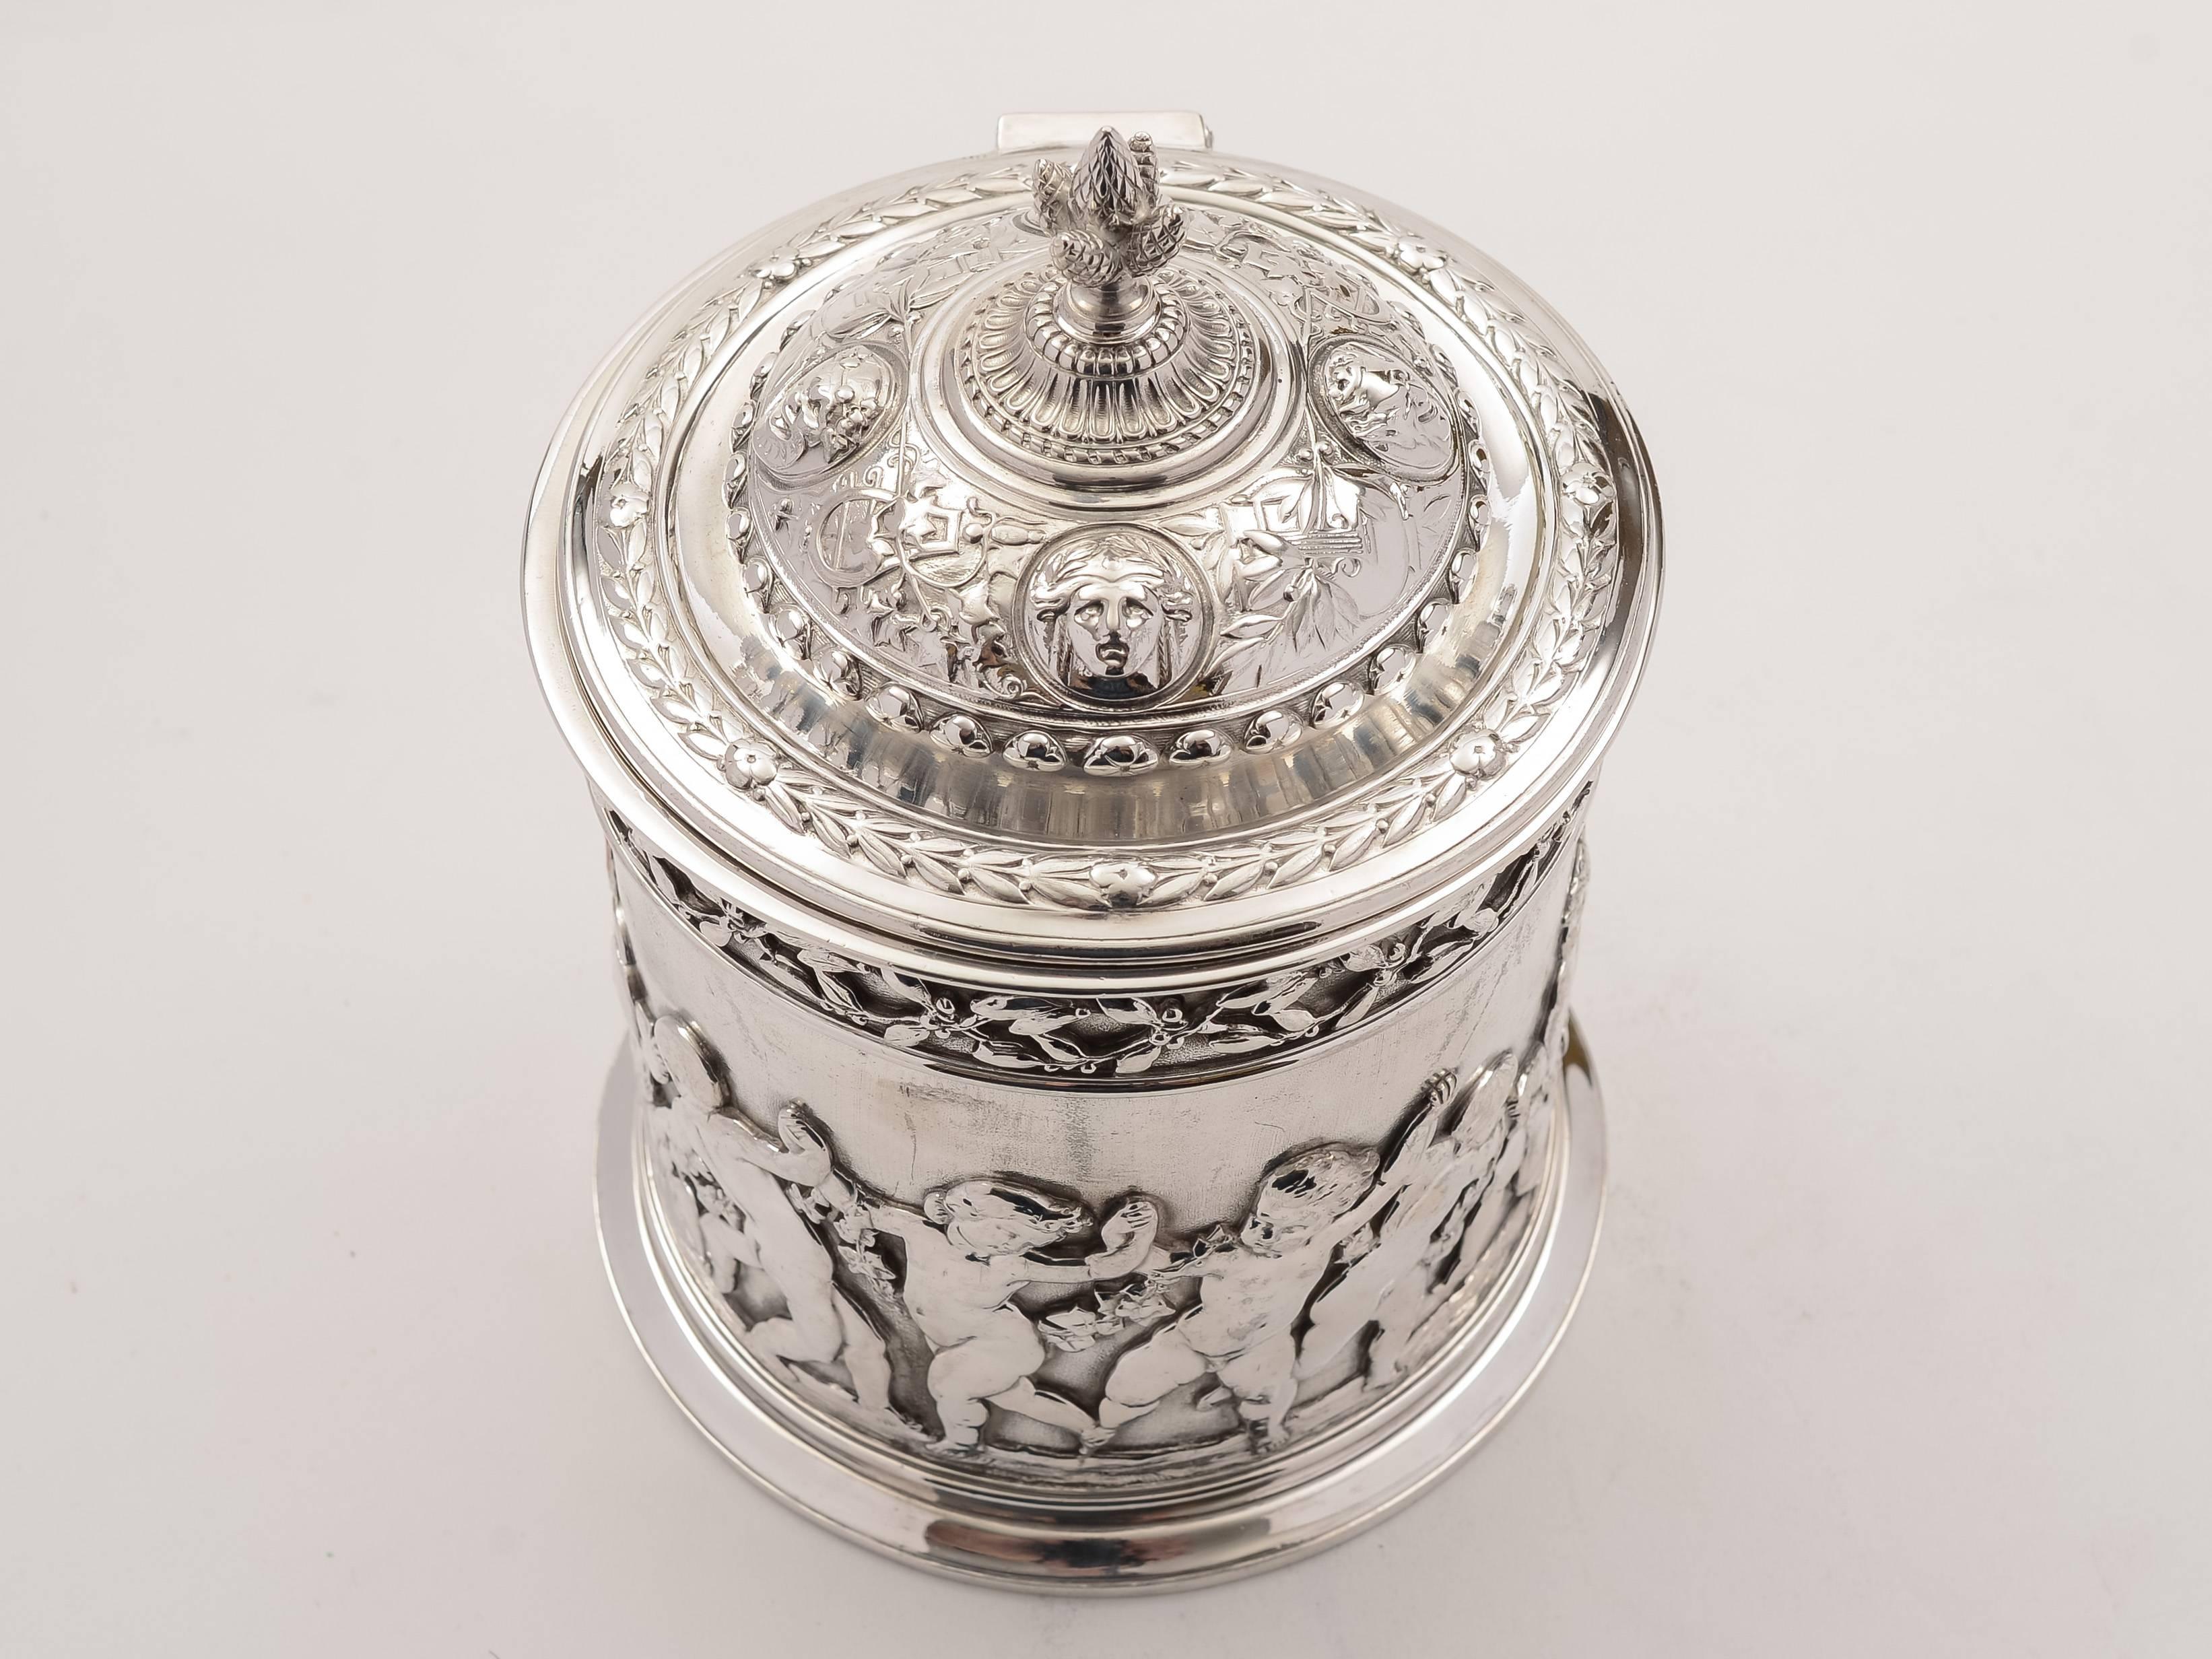 Late 19th Century 19th Century Victorian Silver Plated Elkington Biscuit Barrel or Cookie Jar For Sale